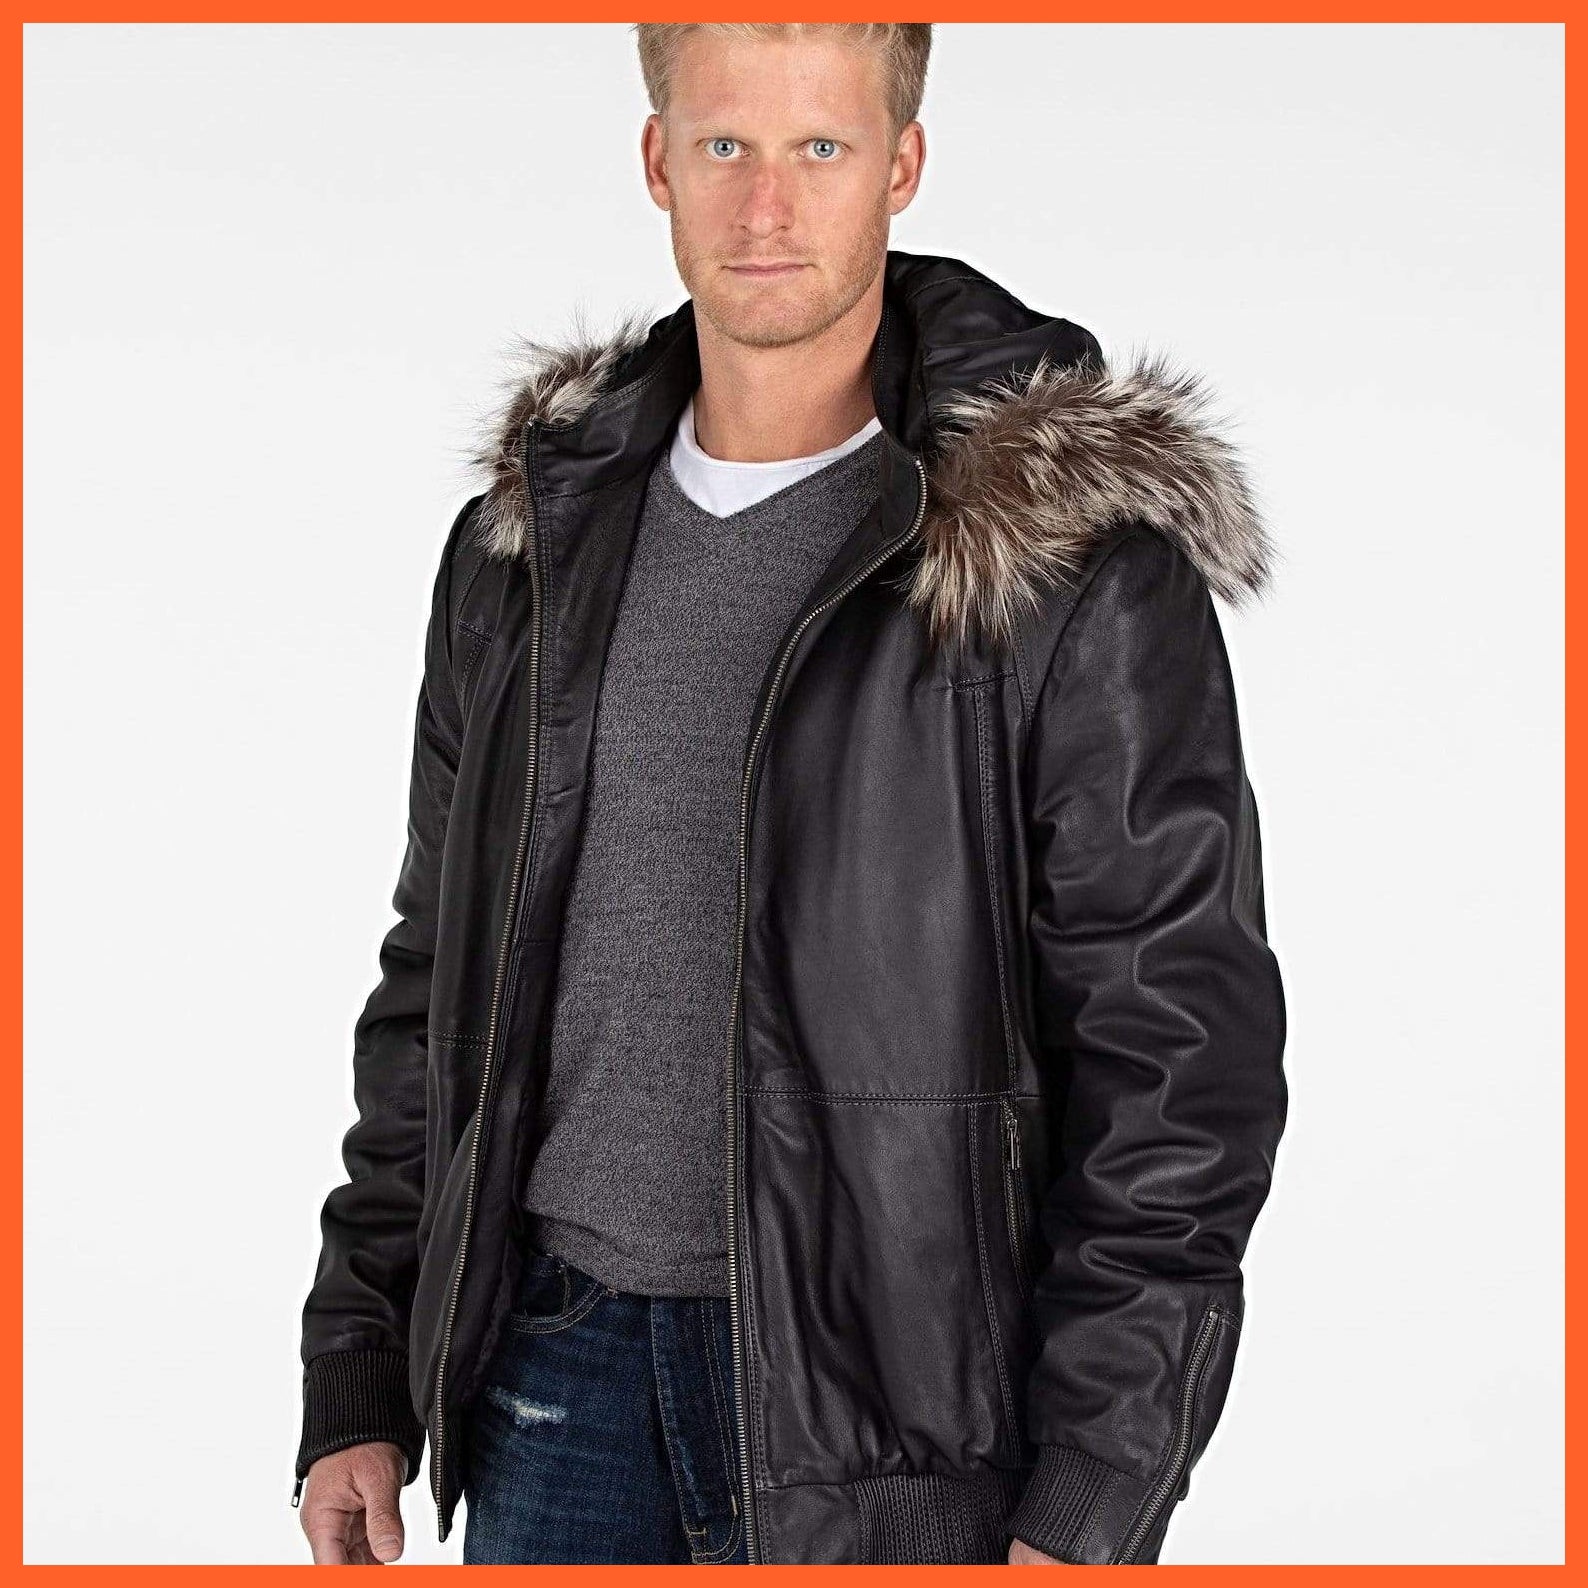 Mens Silver Fox Look Fur Hooded Leather Jacket - Clearance | whatagift.com.au.